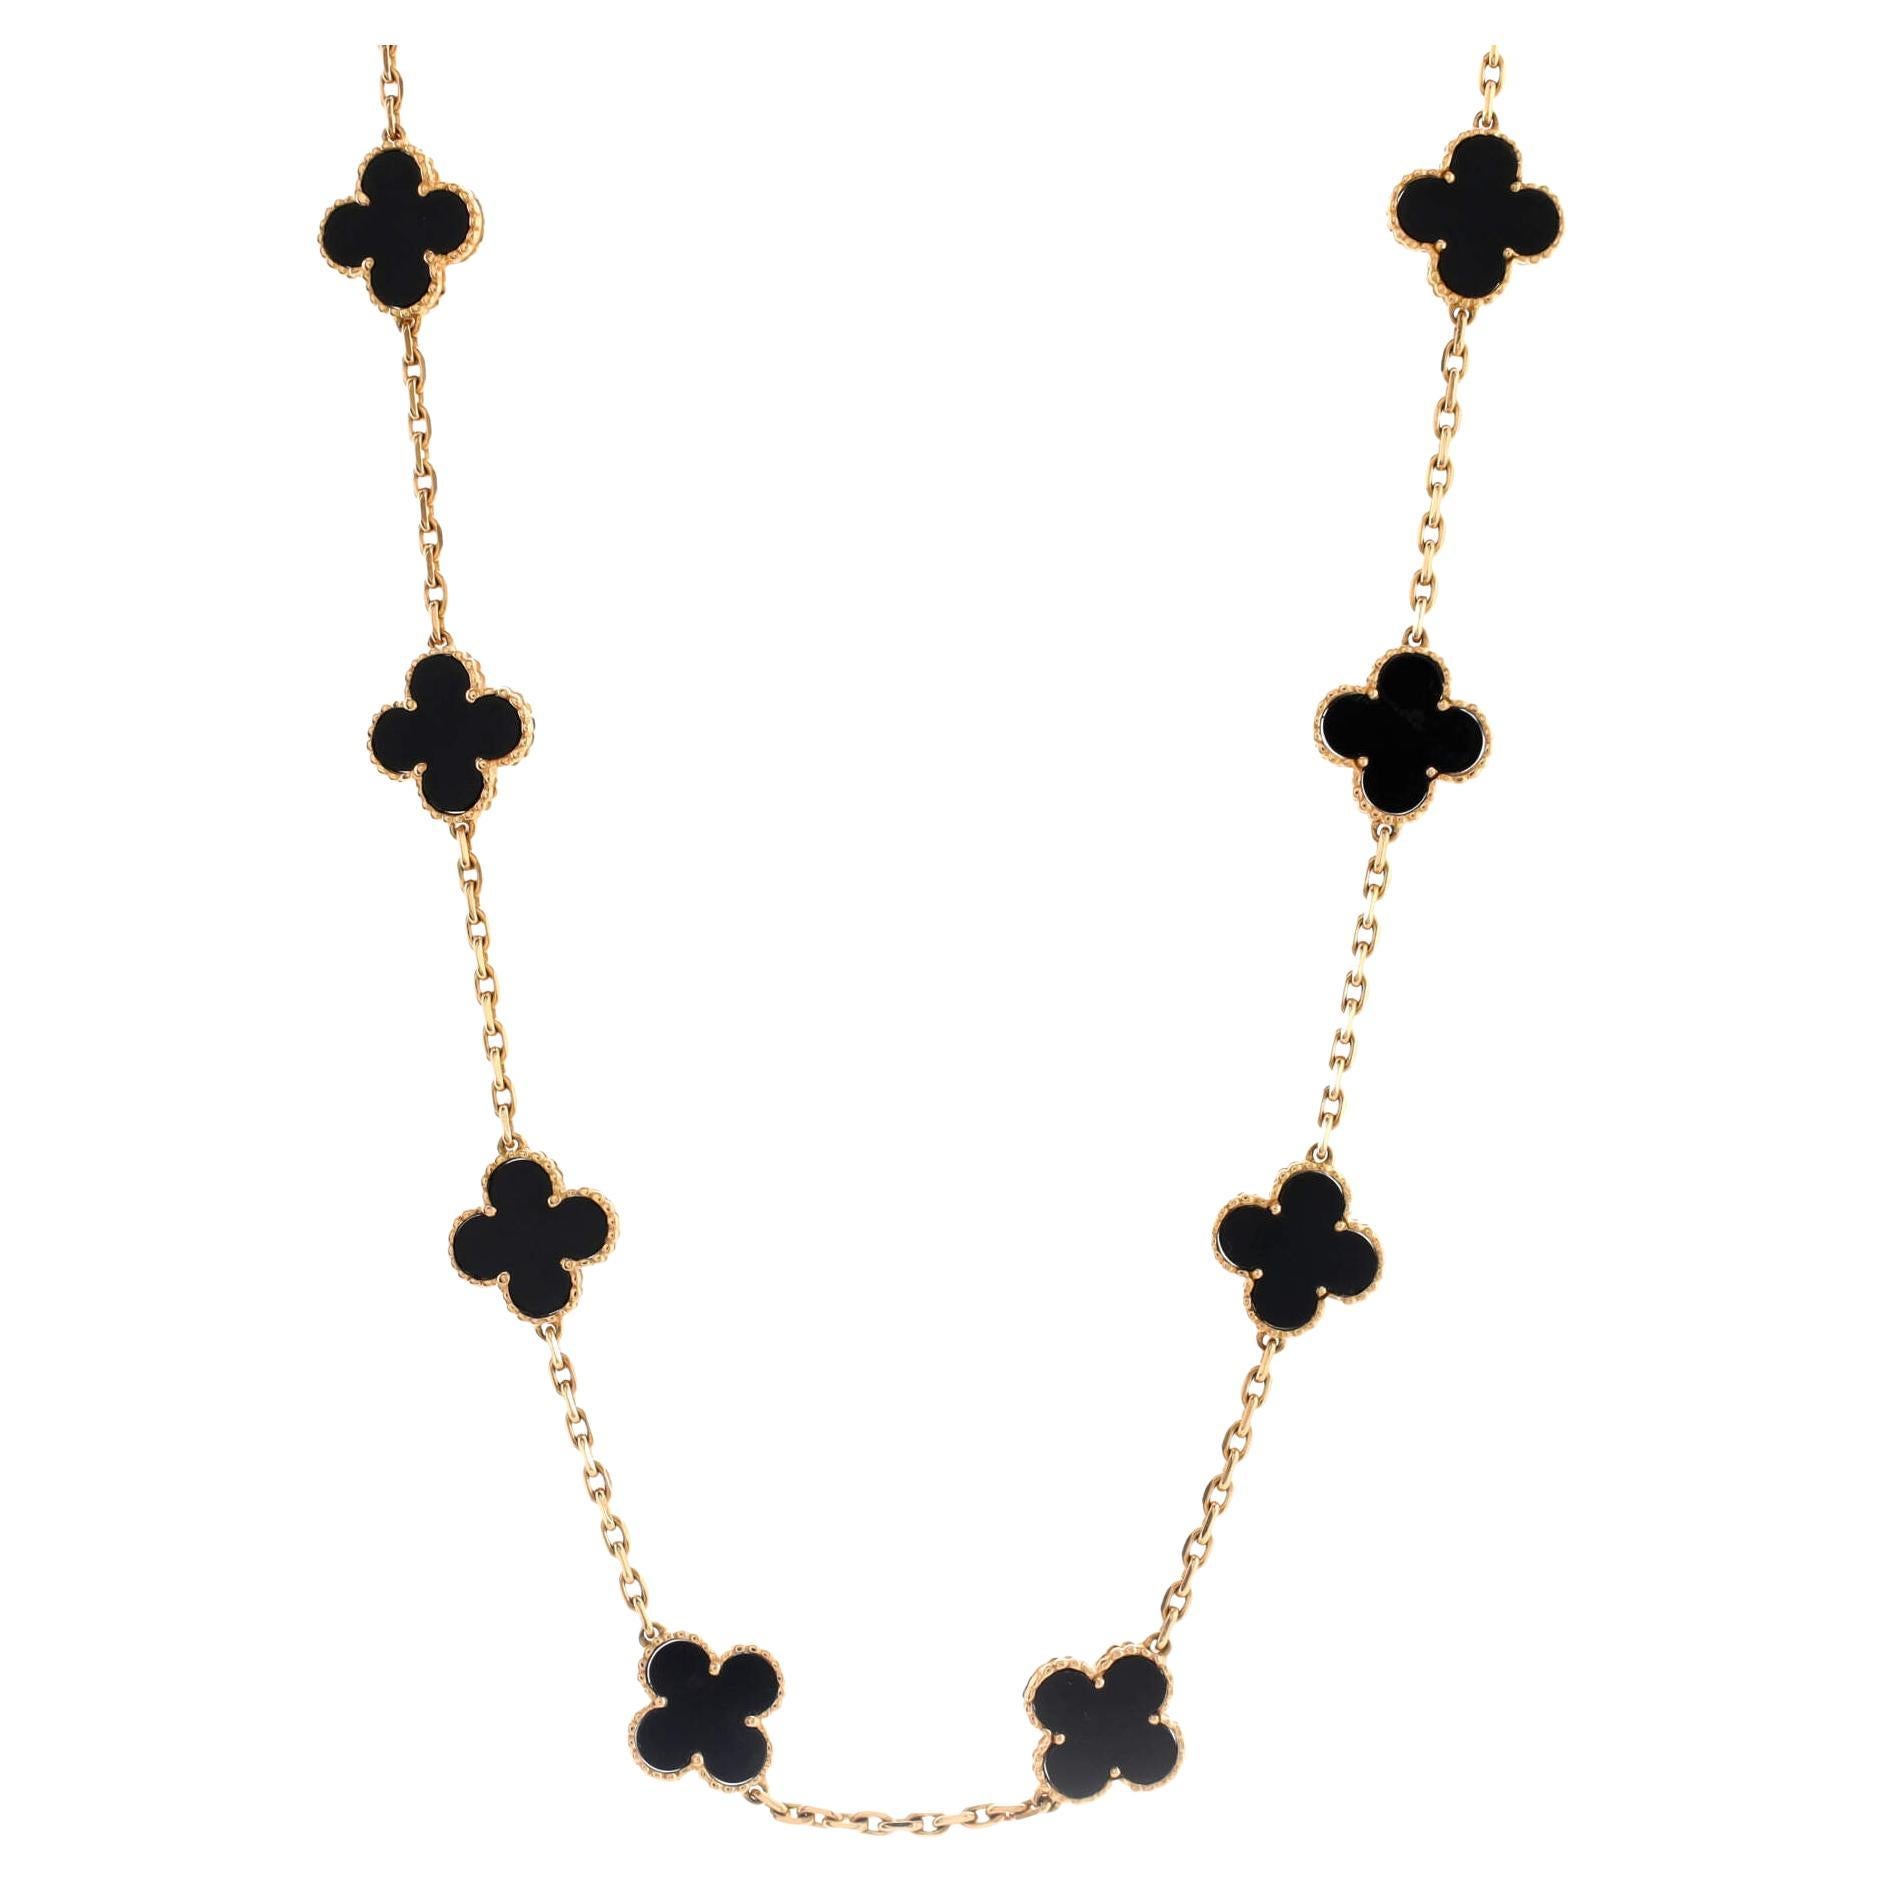 Van Cleef & Arpels Vintage Alhambra 20 Motifs Necklace 18k Yellow Gold and Onyx